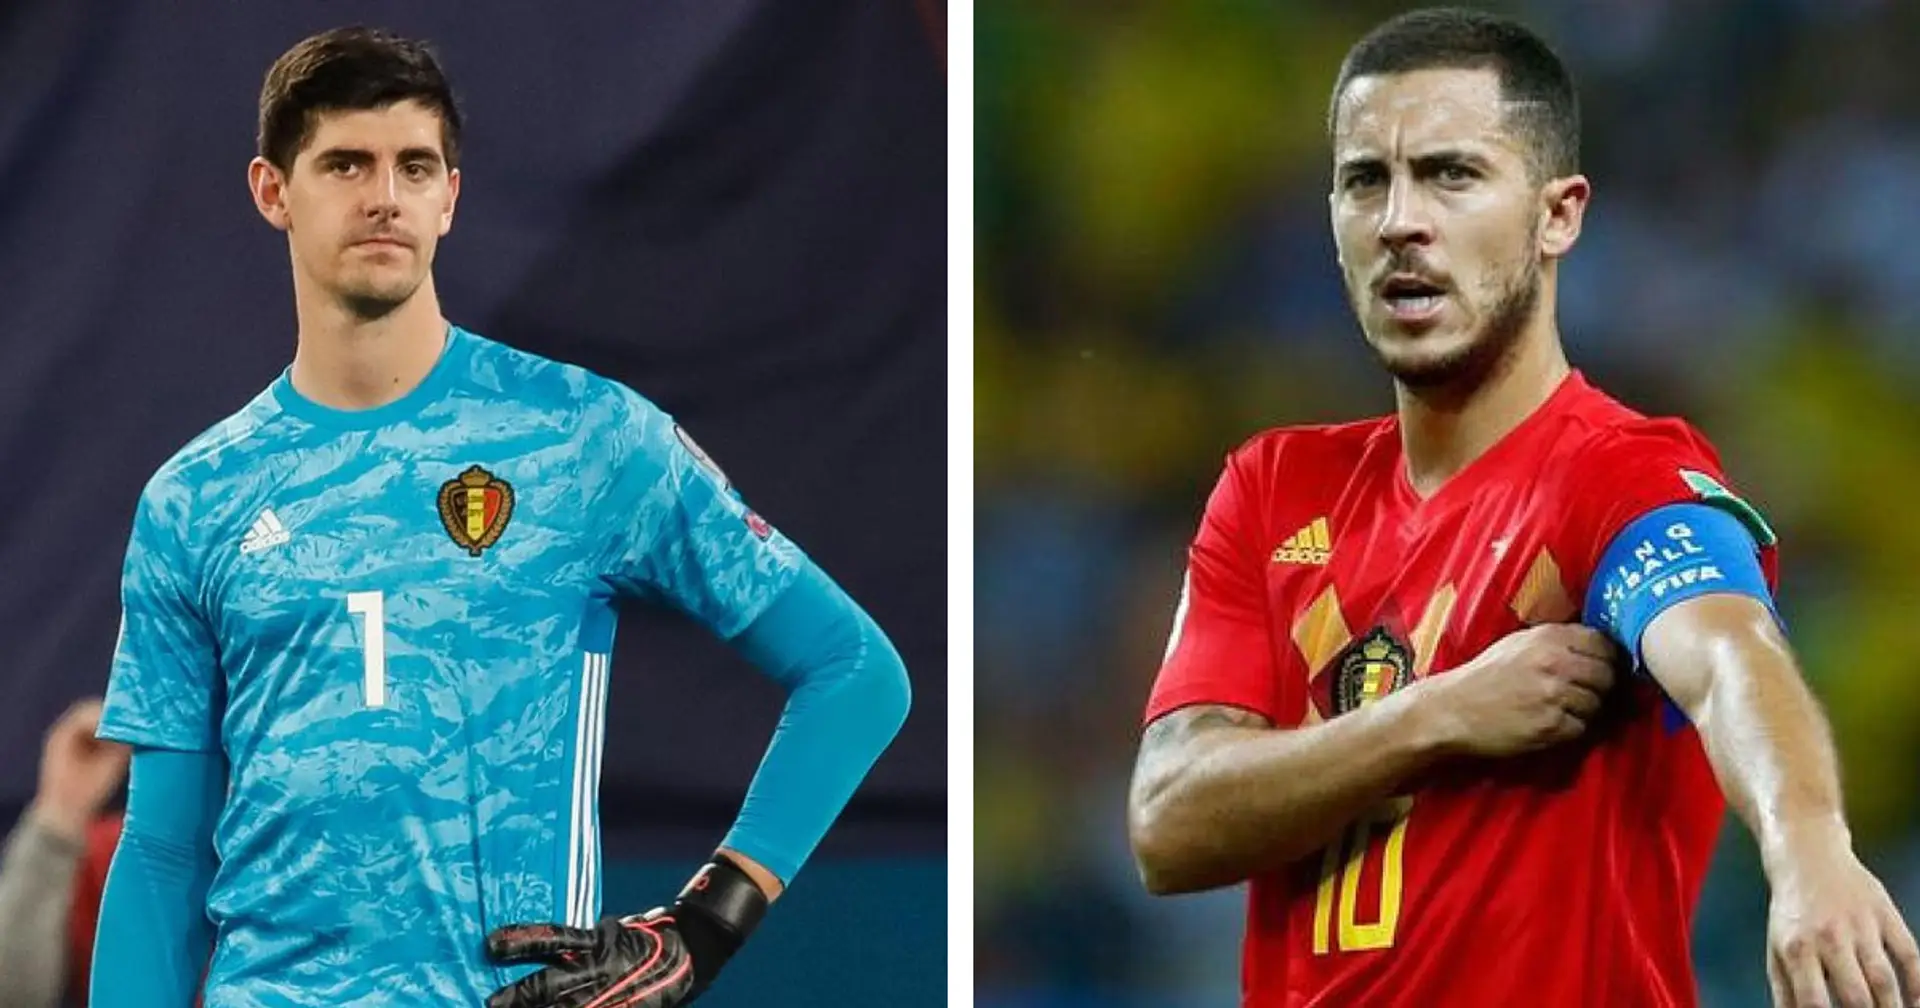 No more Madrid players left at Euros as Courtois and Hazard eliminated